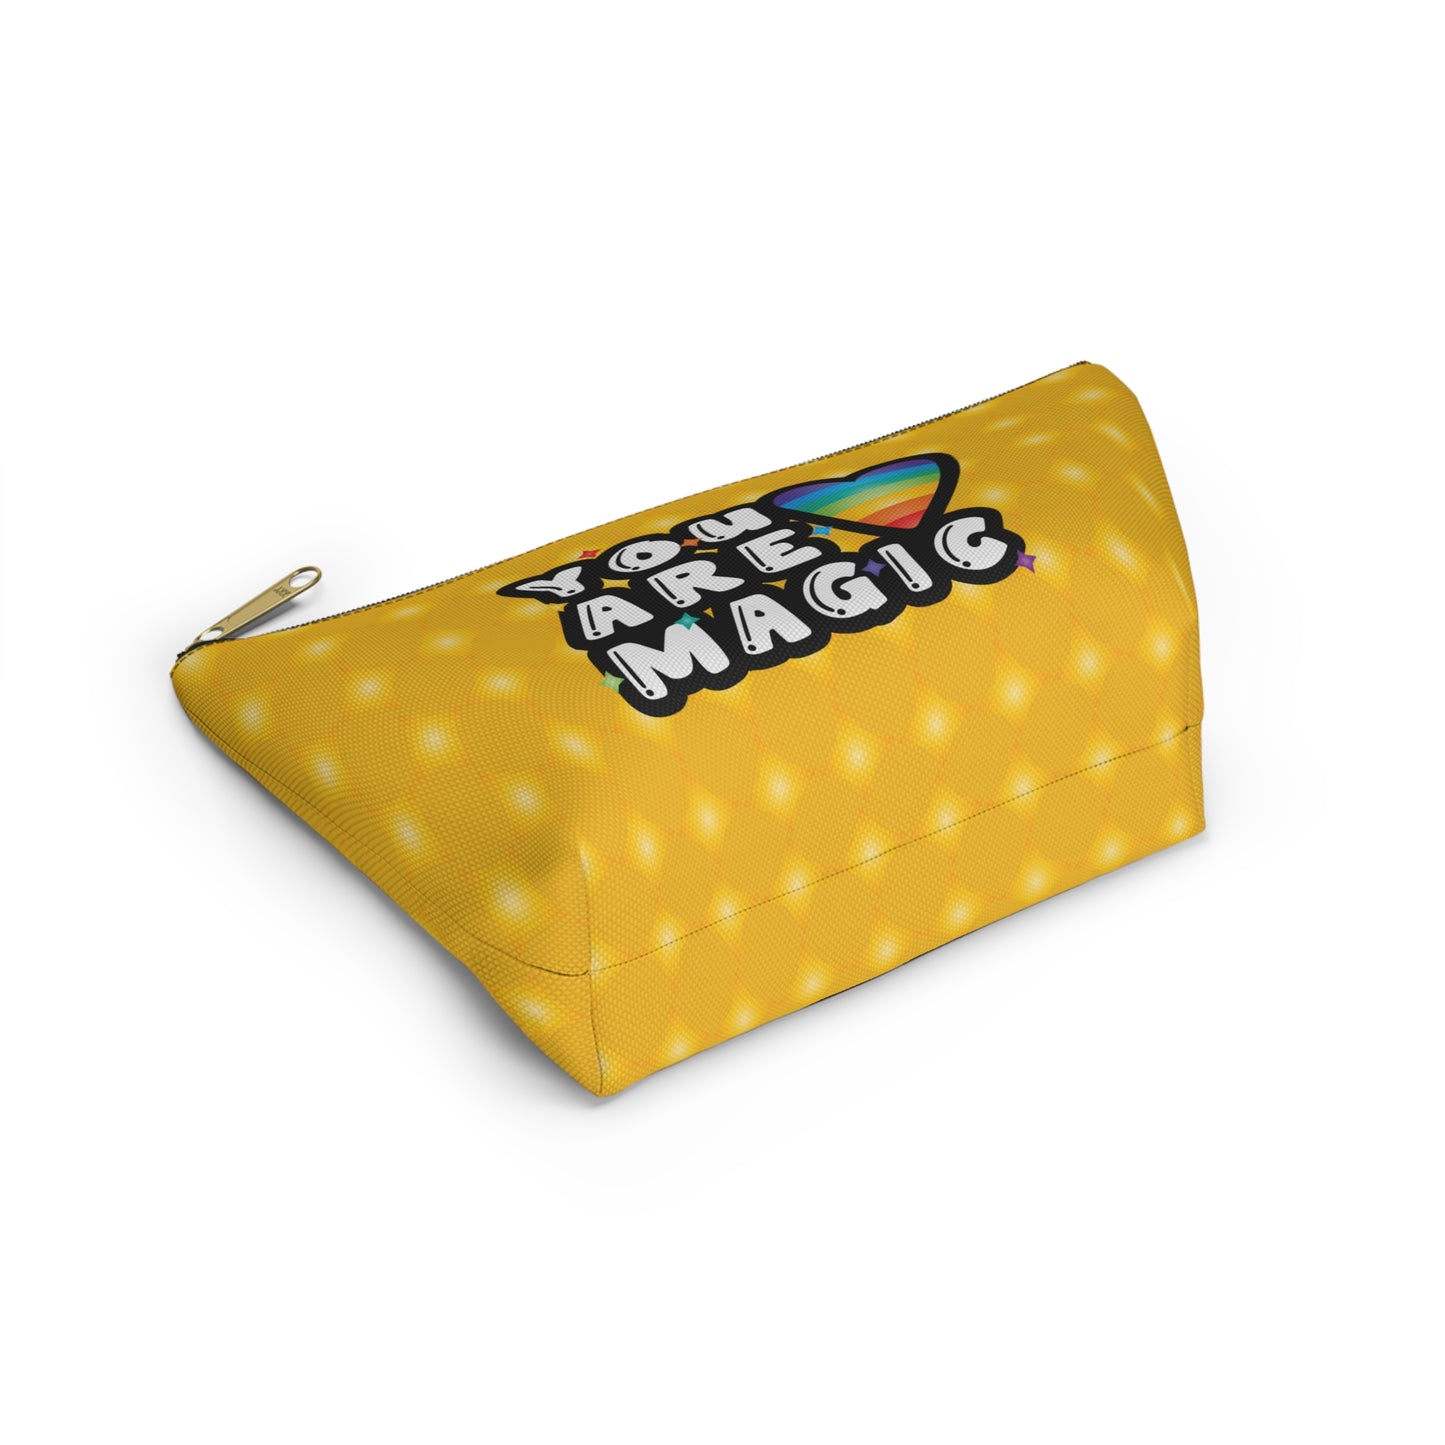 You Are Magic in Yellow Accessory Pouch